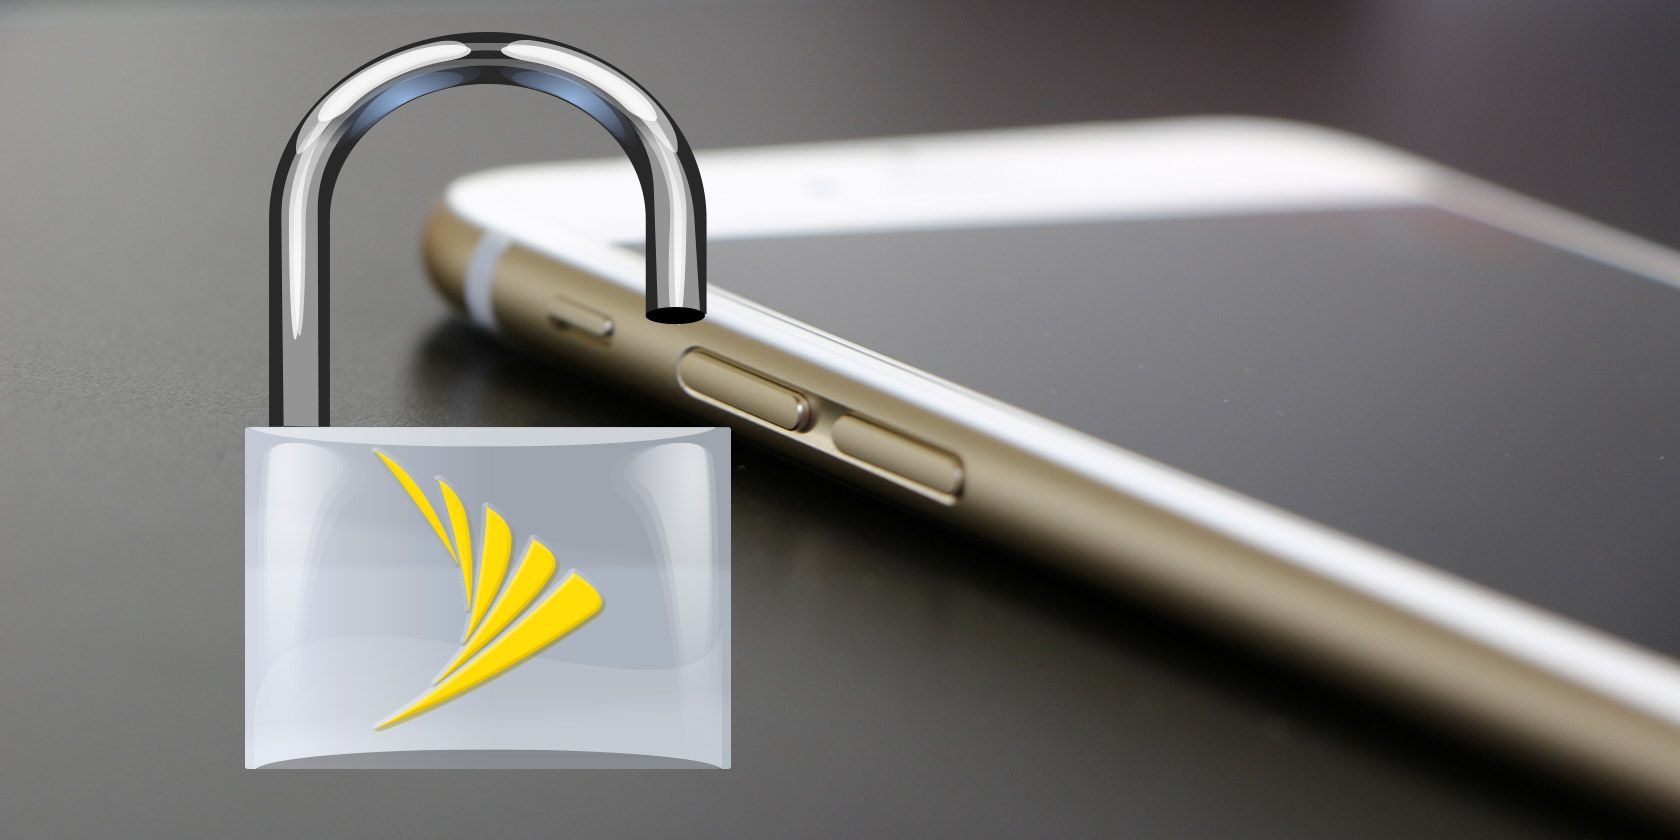 unlock sprint iphone without account